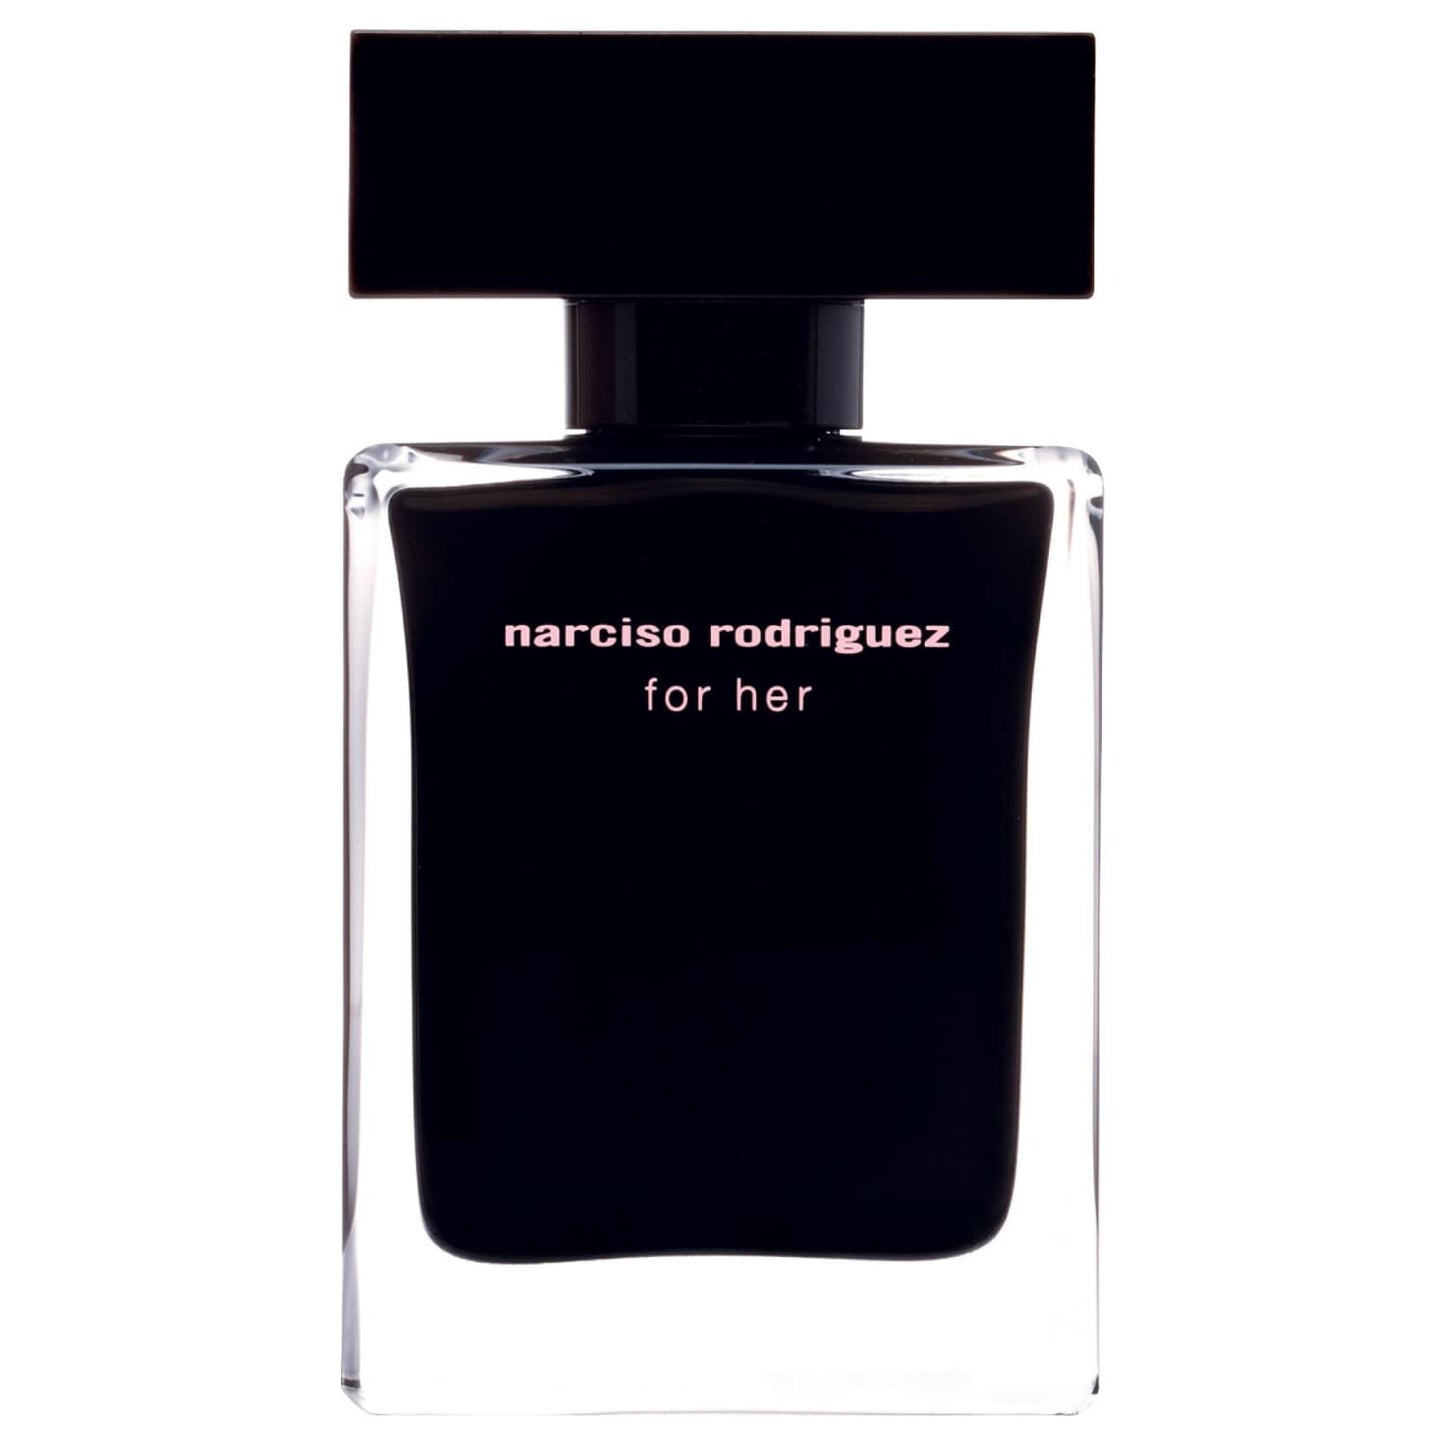 Narciso Rodriguez for her edt